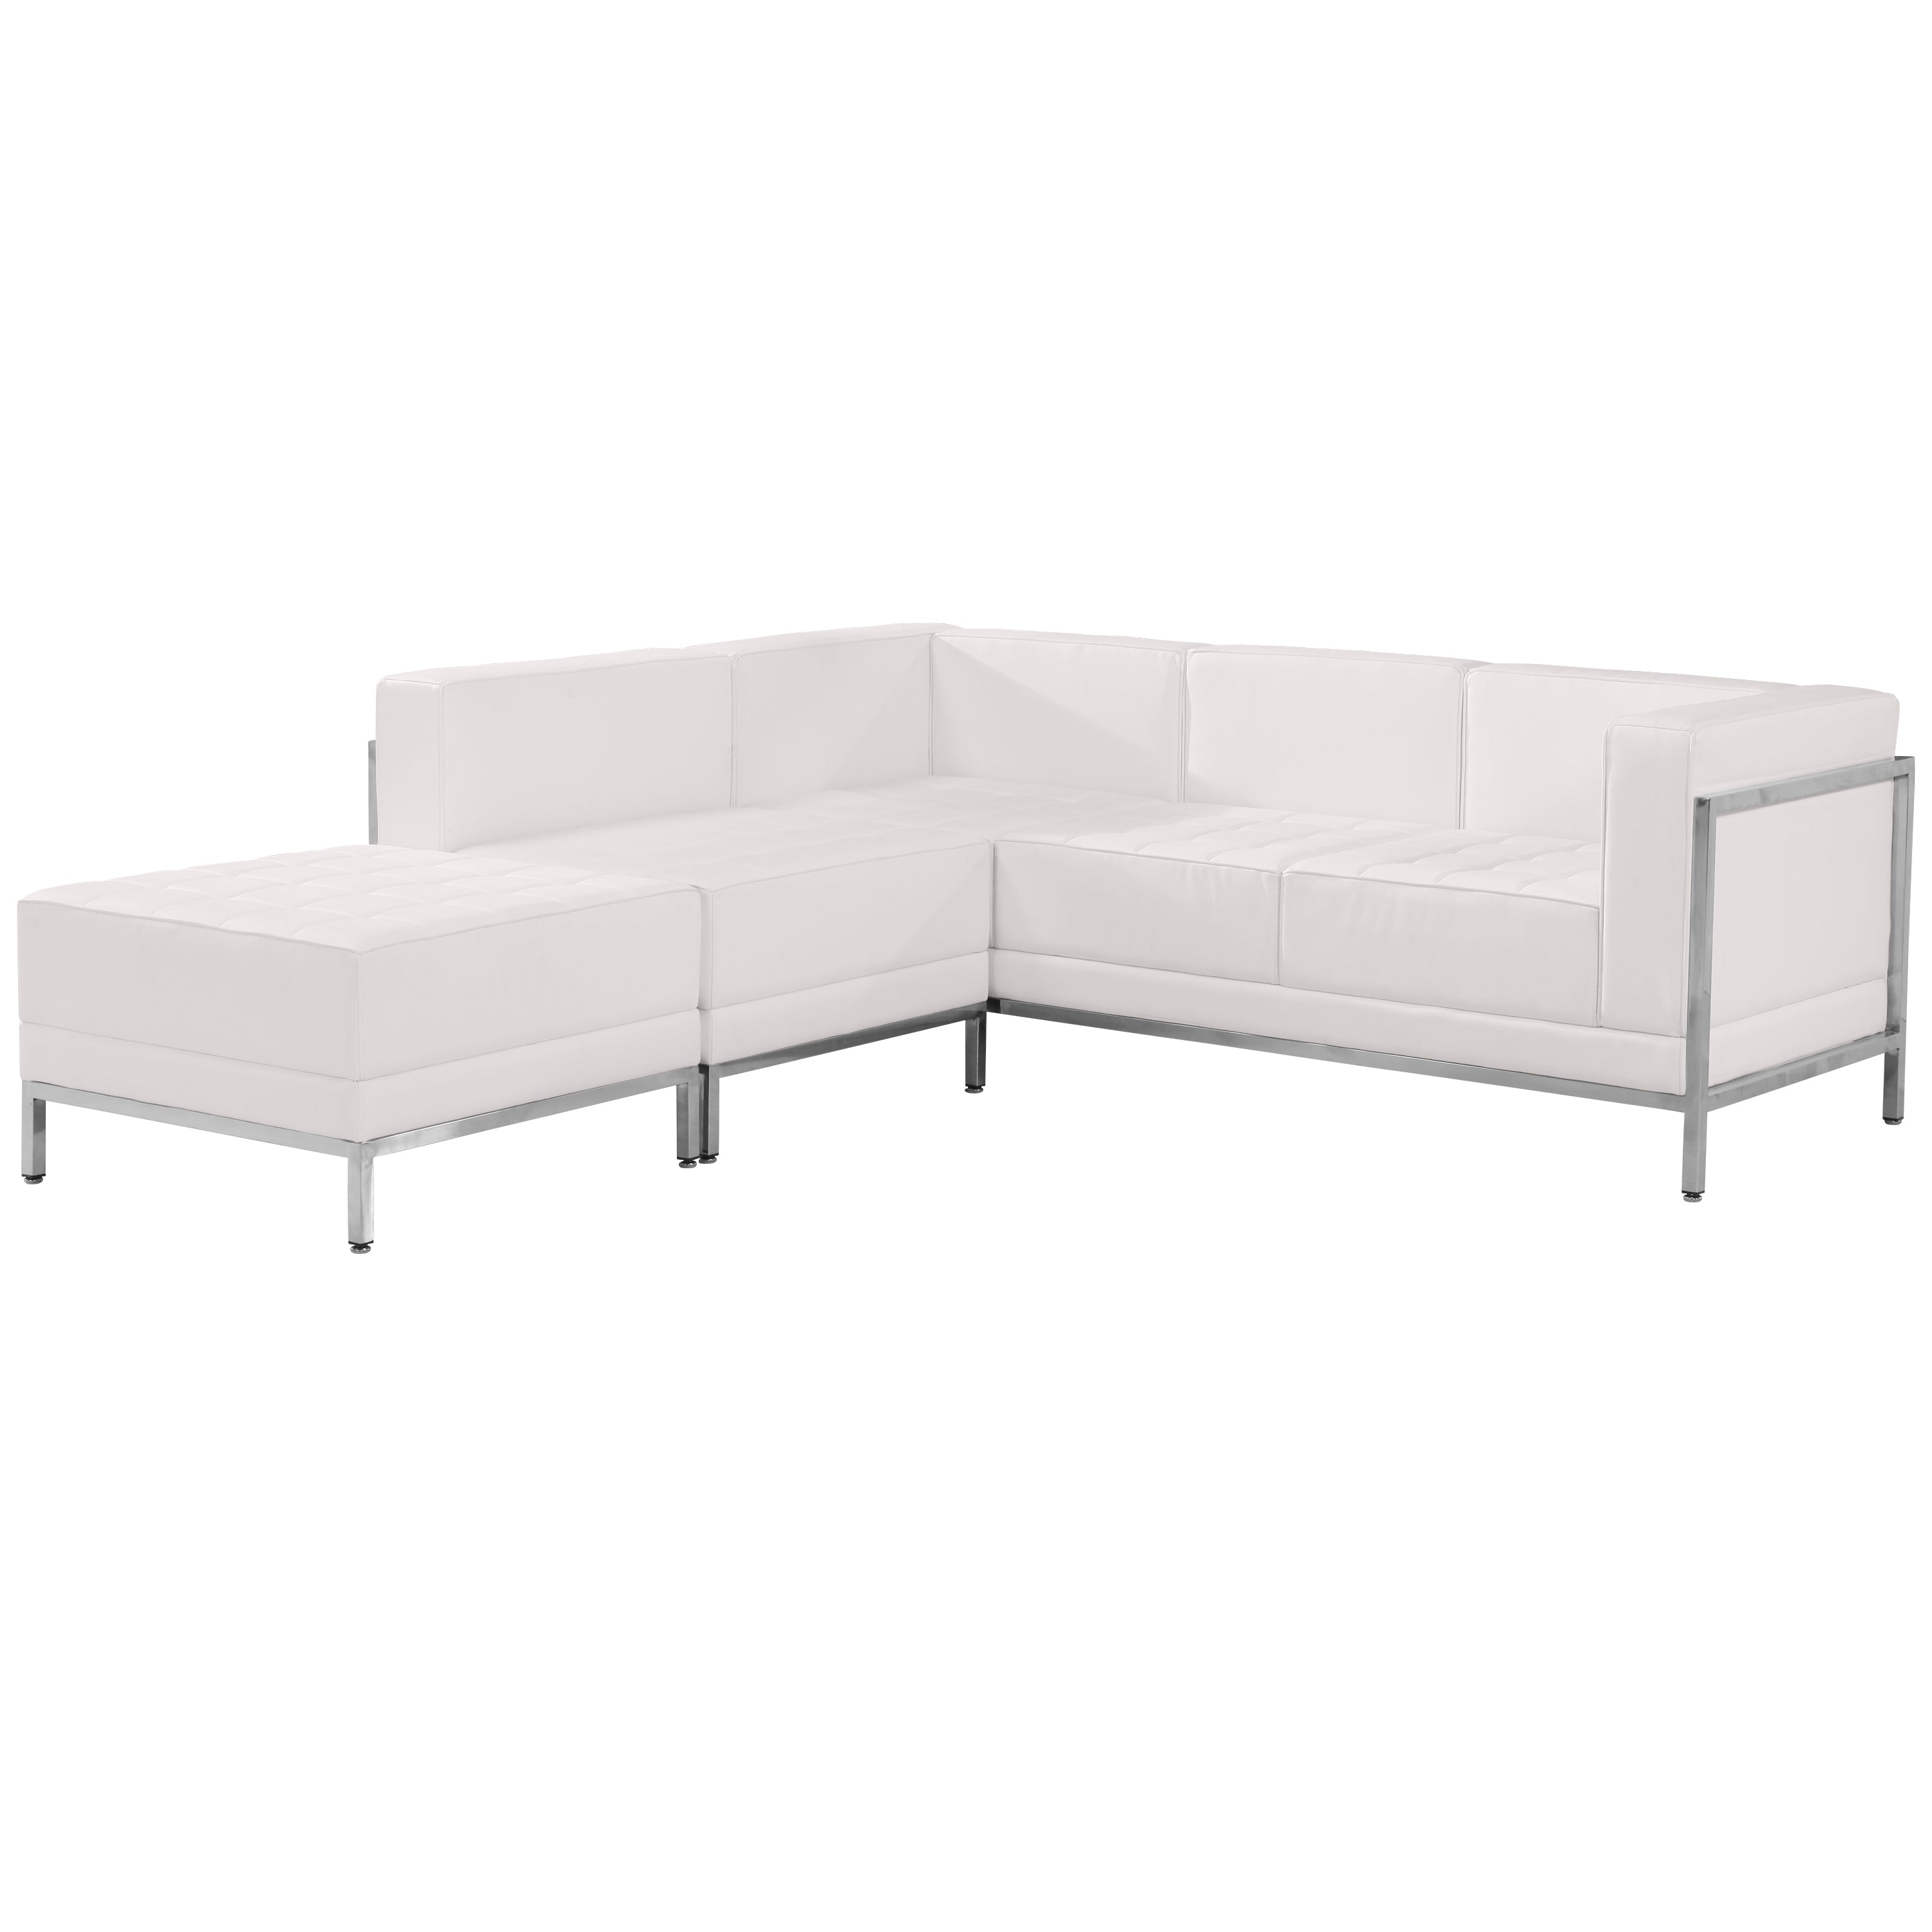 HERCULES Imagination Series LeatherSoft Sectional Configuration, 3 Pieces-Modular Reception Set-Flash Furniture-Wall2Wall Furnishings